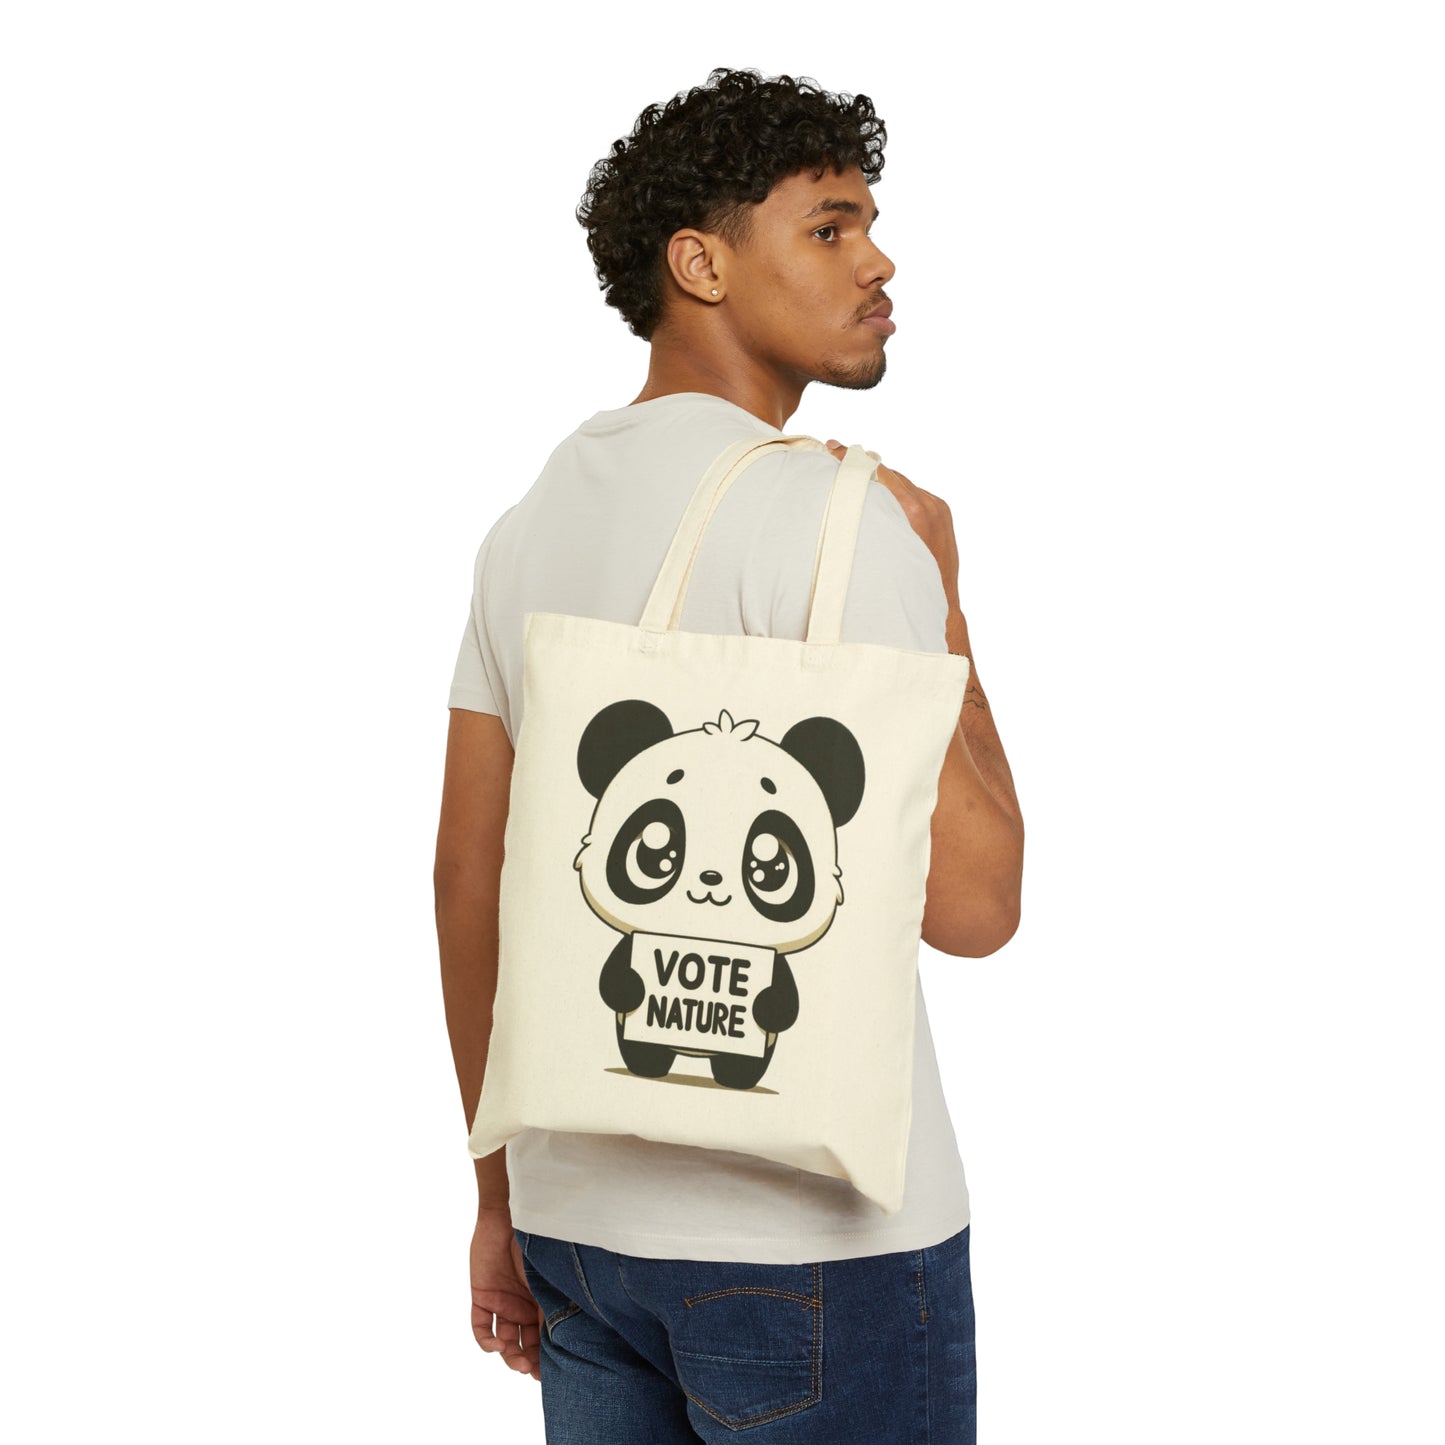 Inspirational Cute Panda Statement Cotton Canvas Tote Bag: Vote Nature! carry a laptop, kindle, phone, notebook, goodies to work/coffee shop